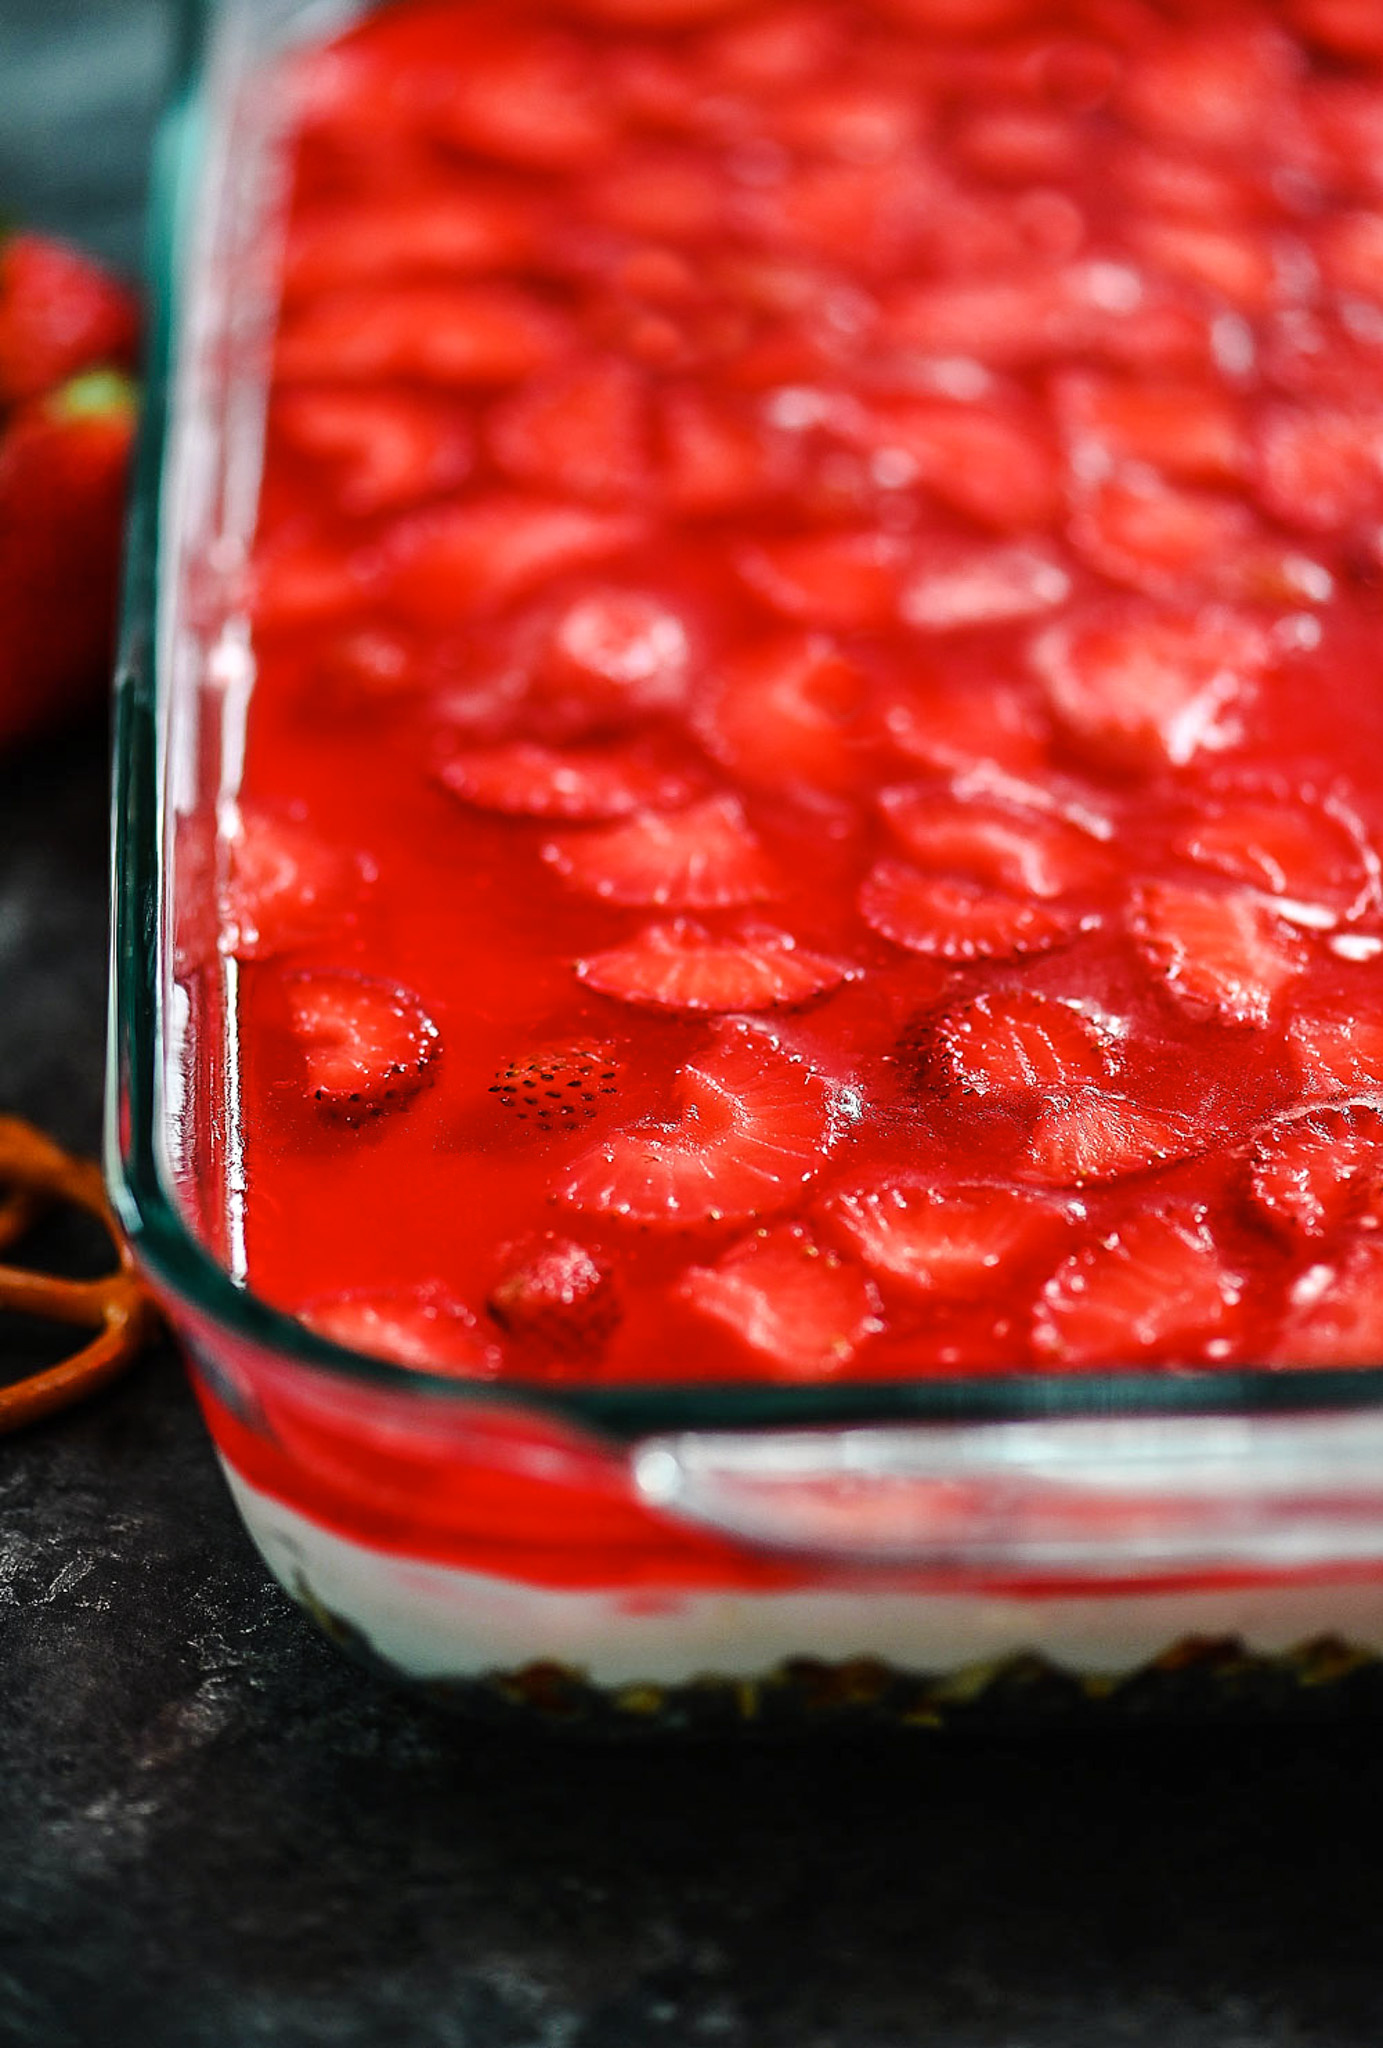 Pretzel salad with cream cheese filling and strawberries.